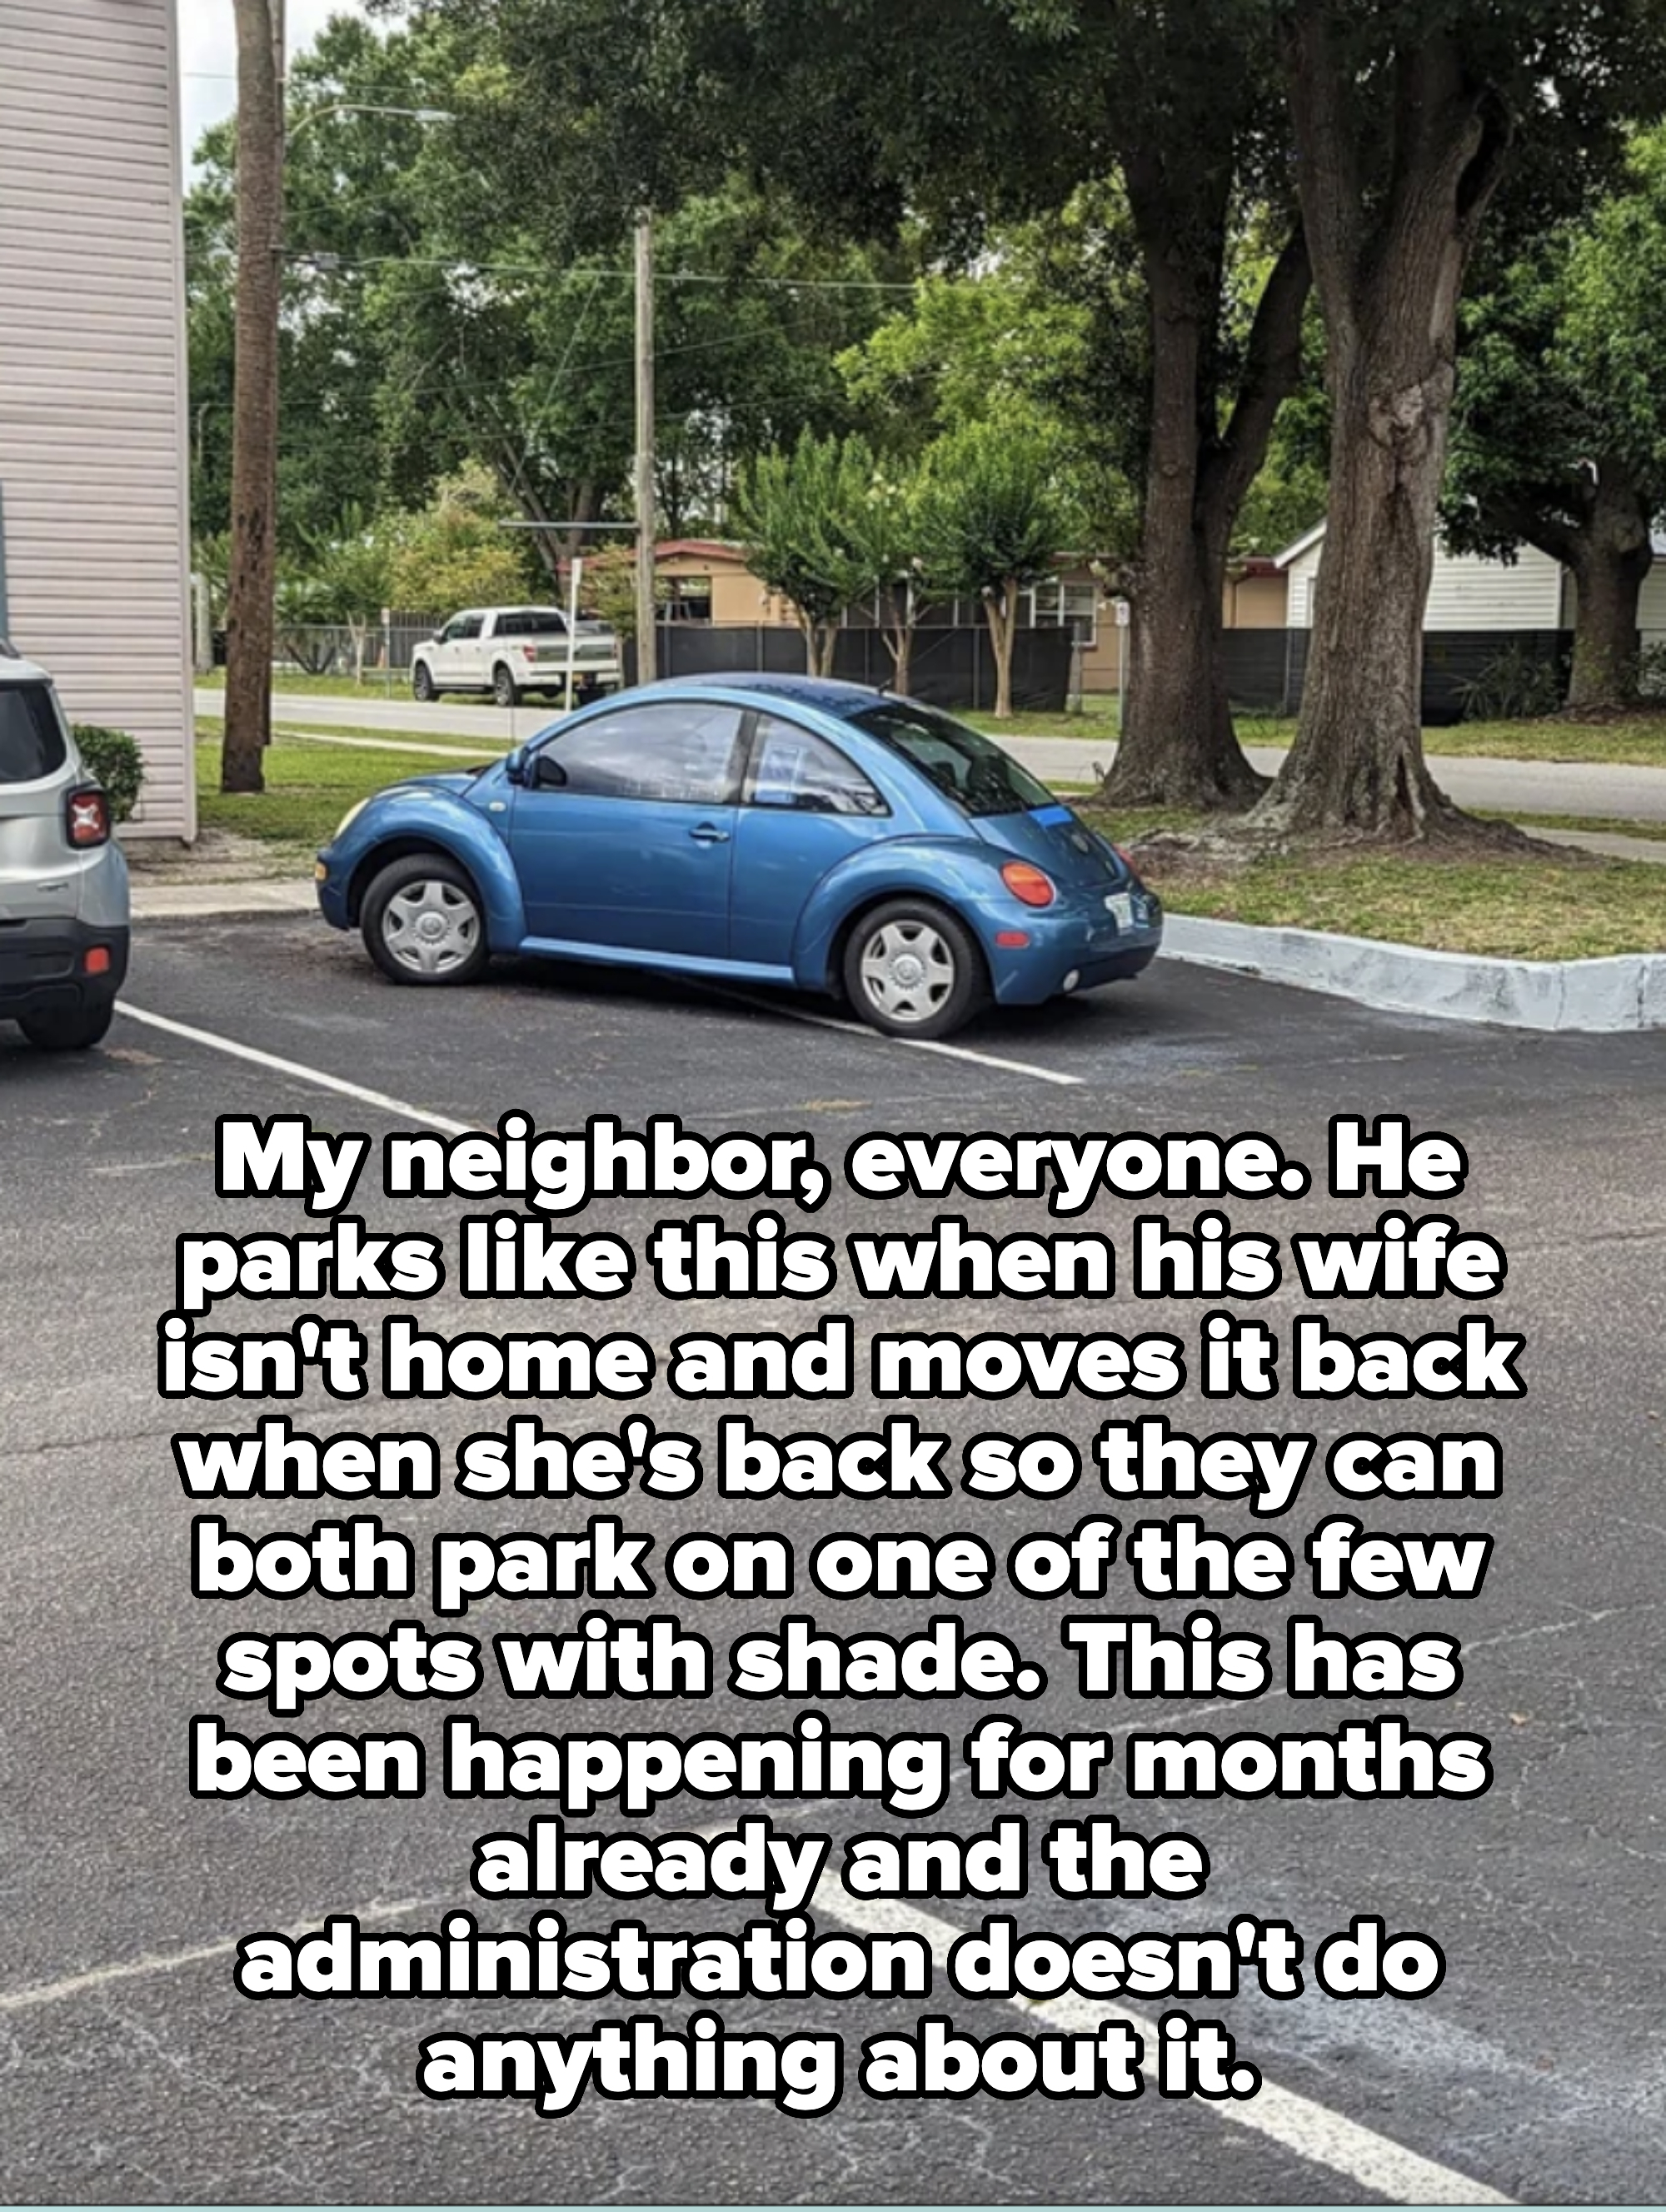 neighbor parks over 2 spots to reserve one for his wife